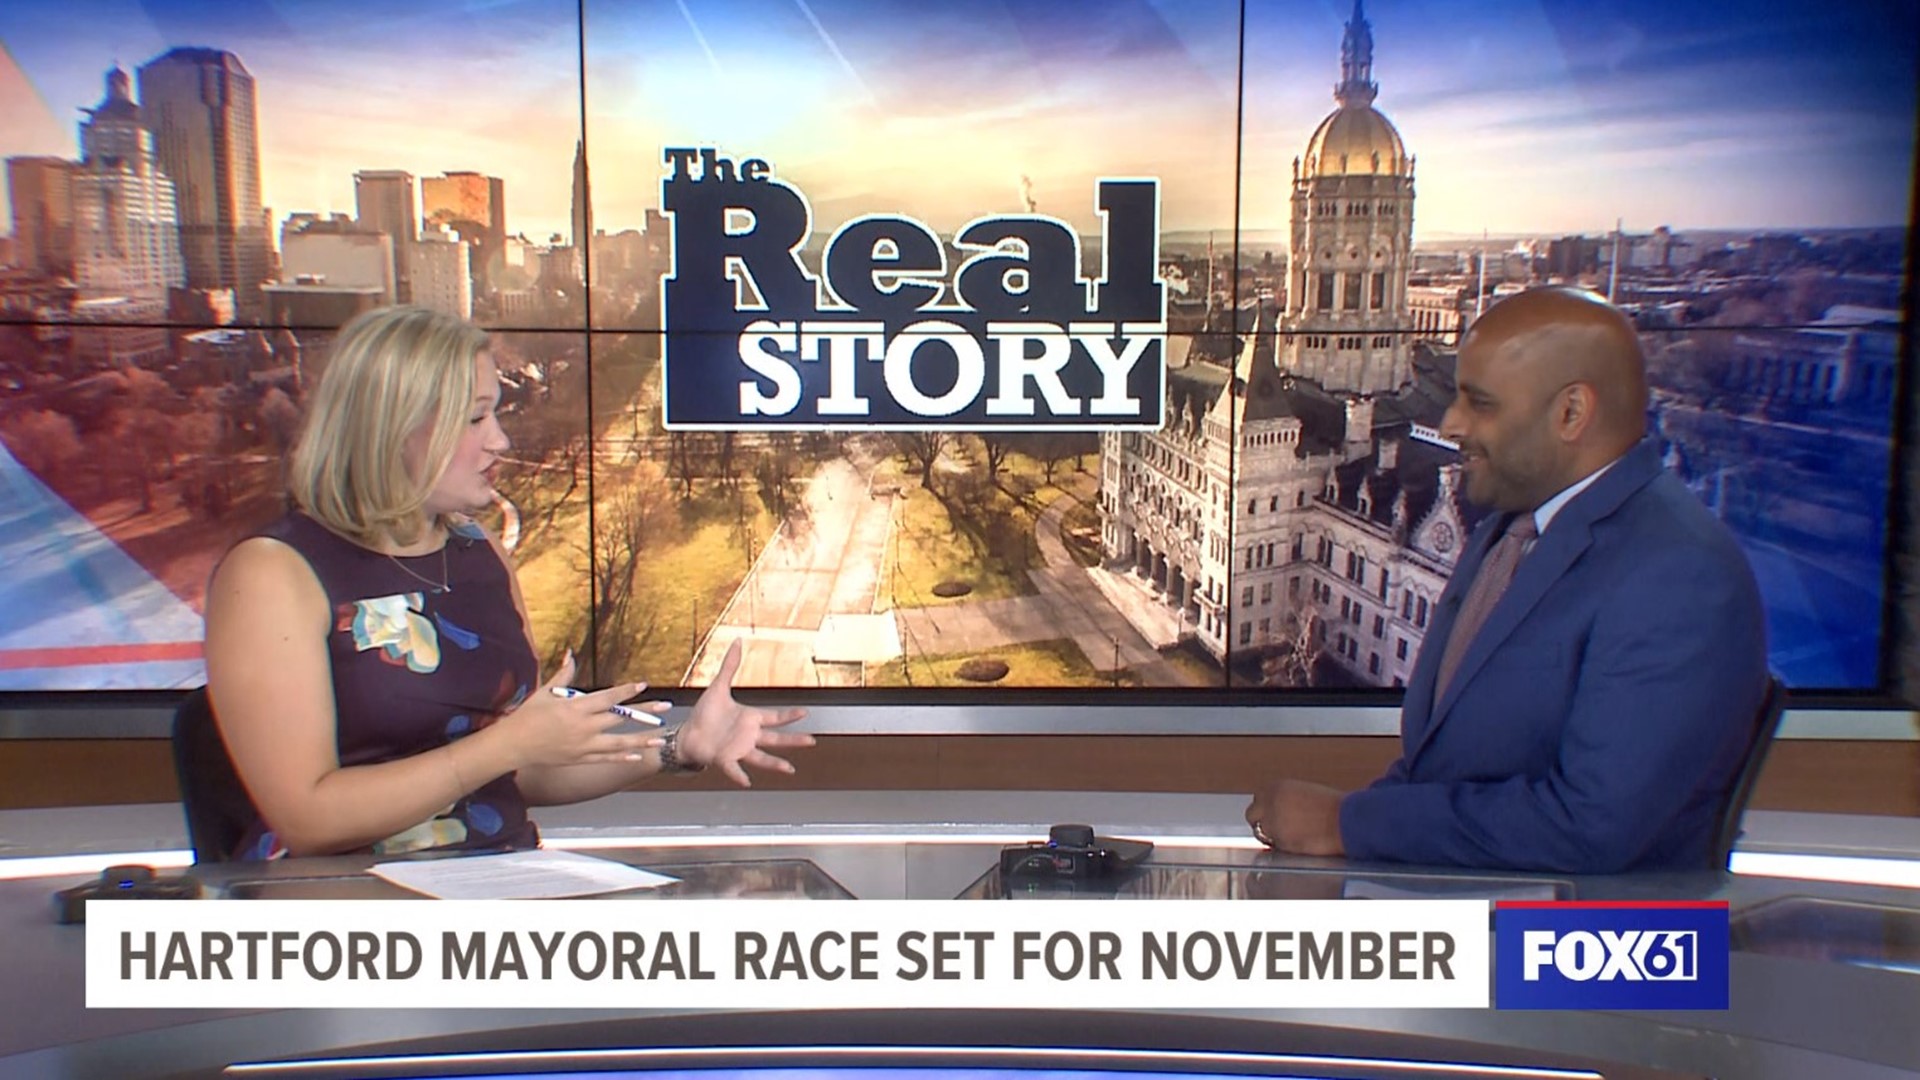 Host Emma Wulfhorst is joined by Democratic nominee for Hartford’s mayoral race, Arunan Arulampalam, on the heels of his primary win. They discuss low voter turnout.